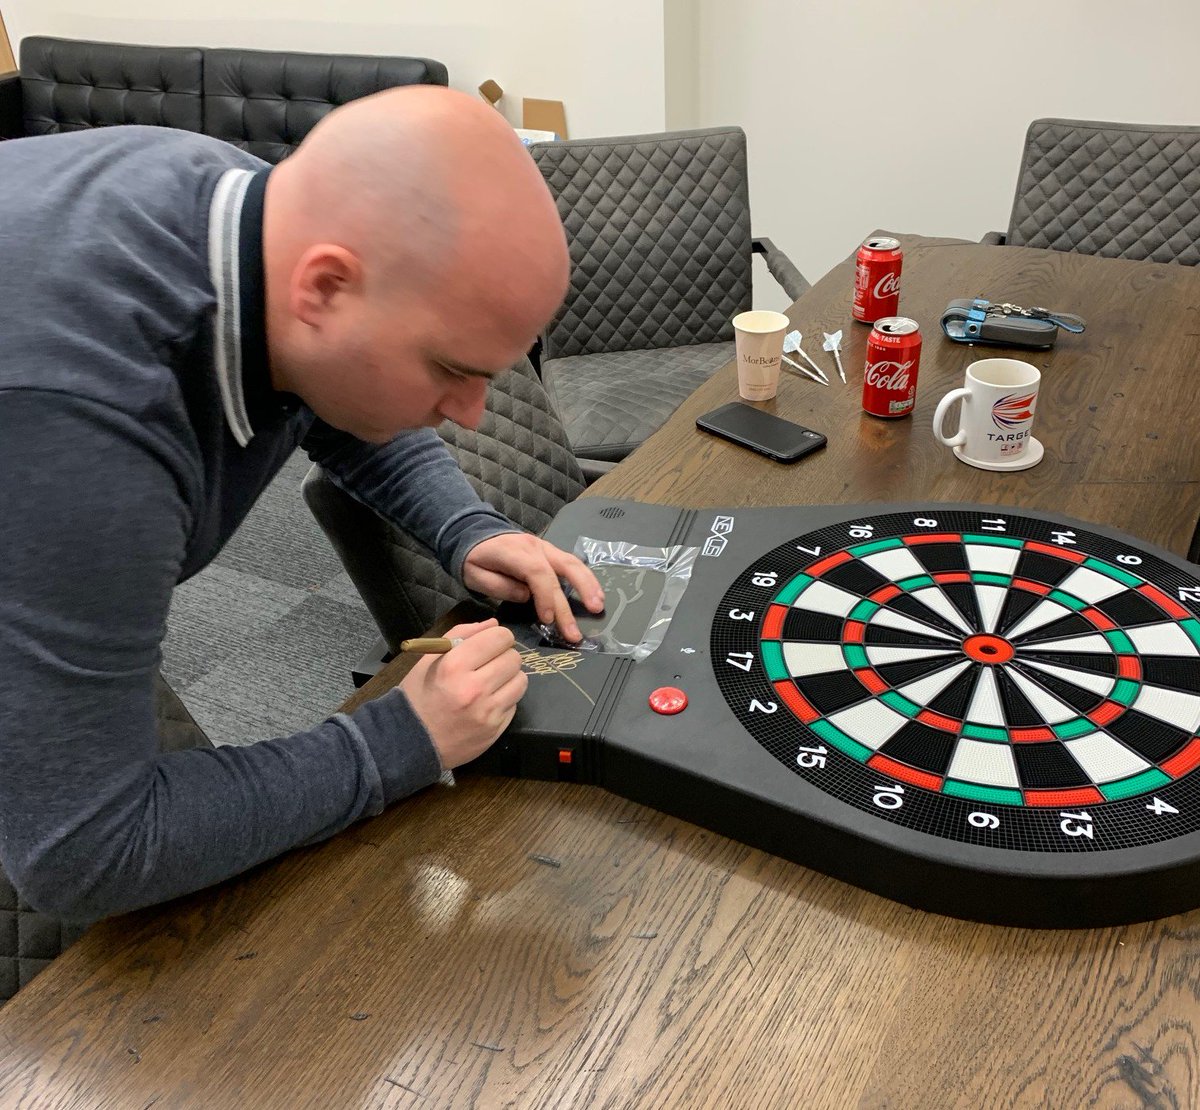 Win a signed Nexus board and set of Gen 1 soft tip darts used by Rob Cross himself on his visit today. Like and share this post to enter. **YOU MUST BE FOLLOWING THE Target Darts ACCOUNT TO WIN! Winner announced Friday, 6th December- good luck!